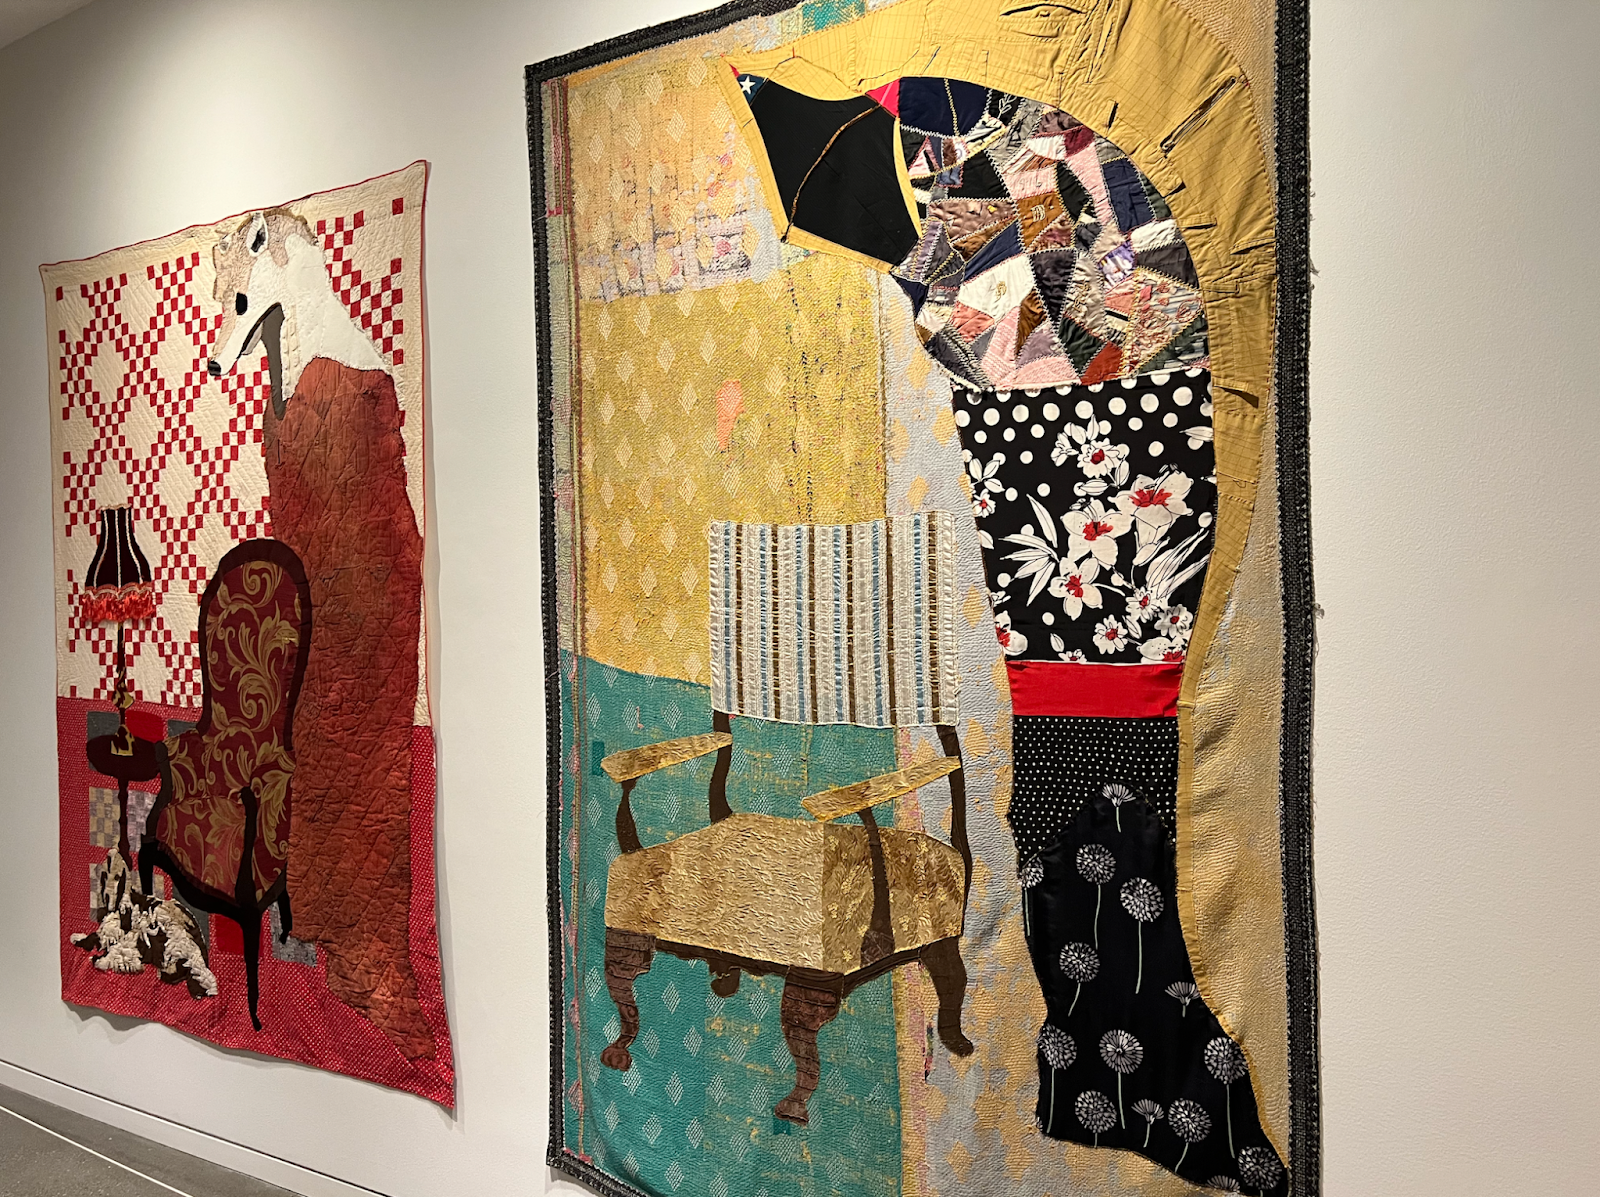 Two art pieces made of clothing side by side. The first art piece is a sofa chair next to a lamp and a wolf like figure. The second art piece is a gold chair and a black floral figure next to it.